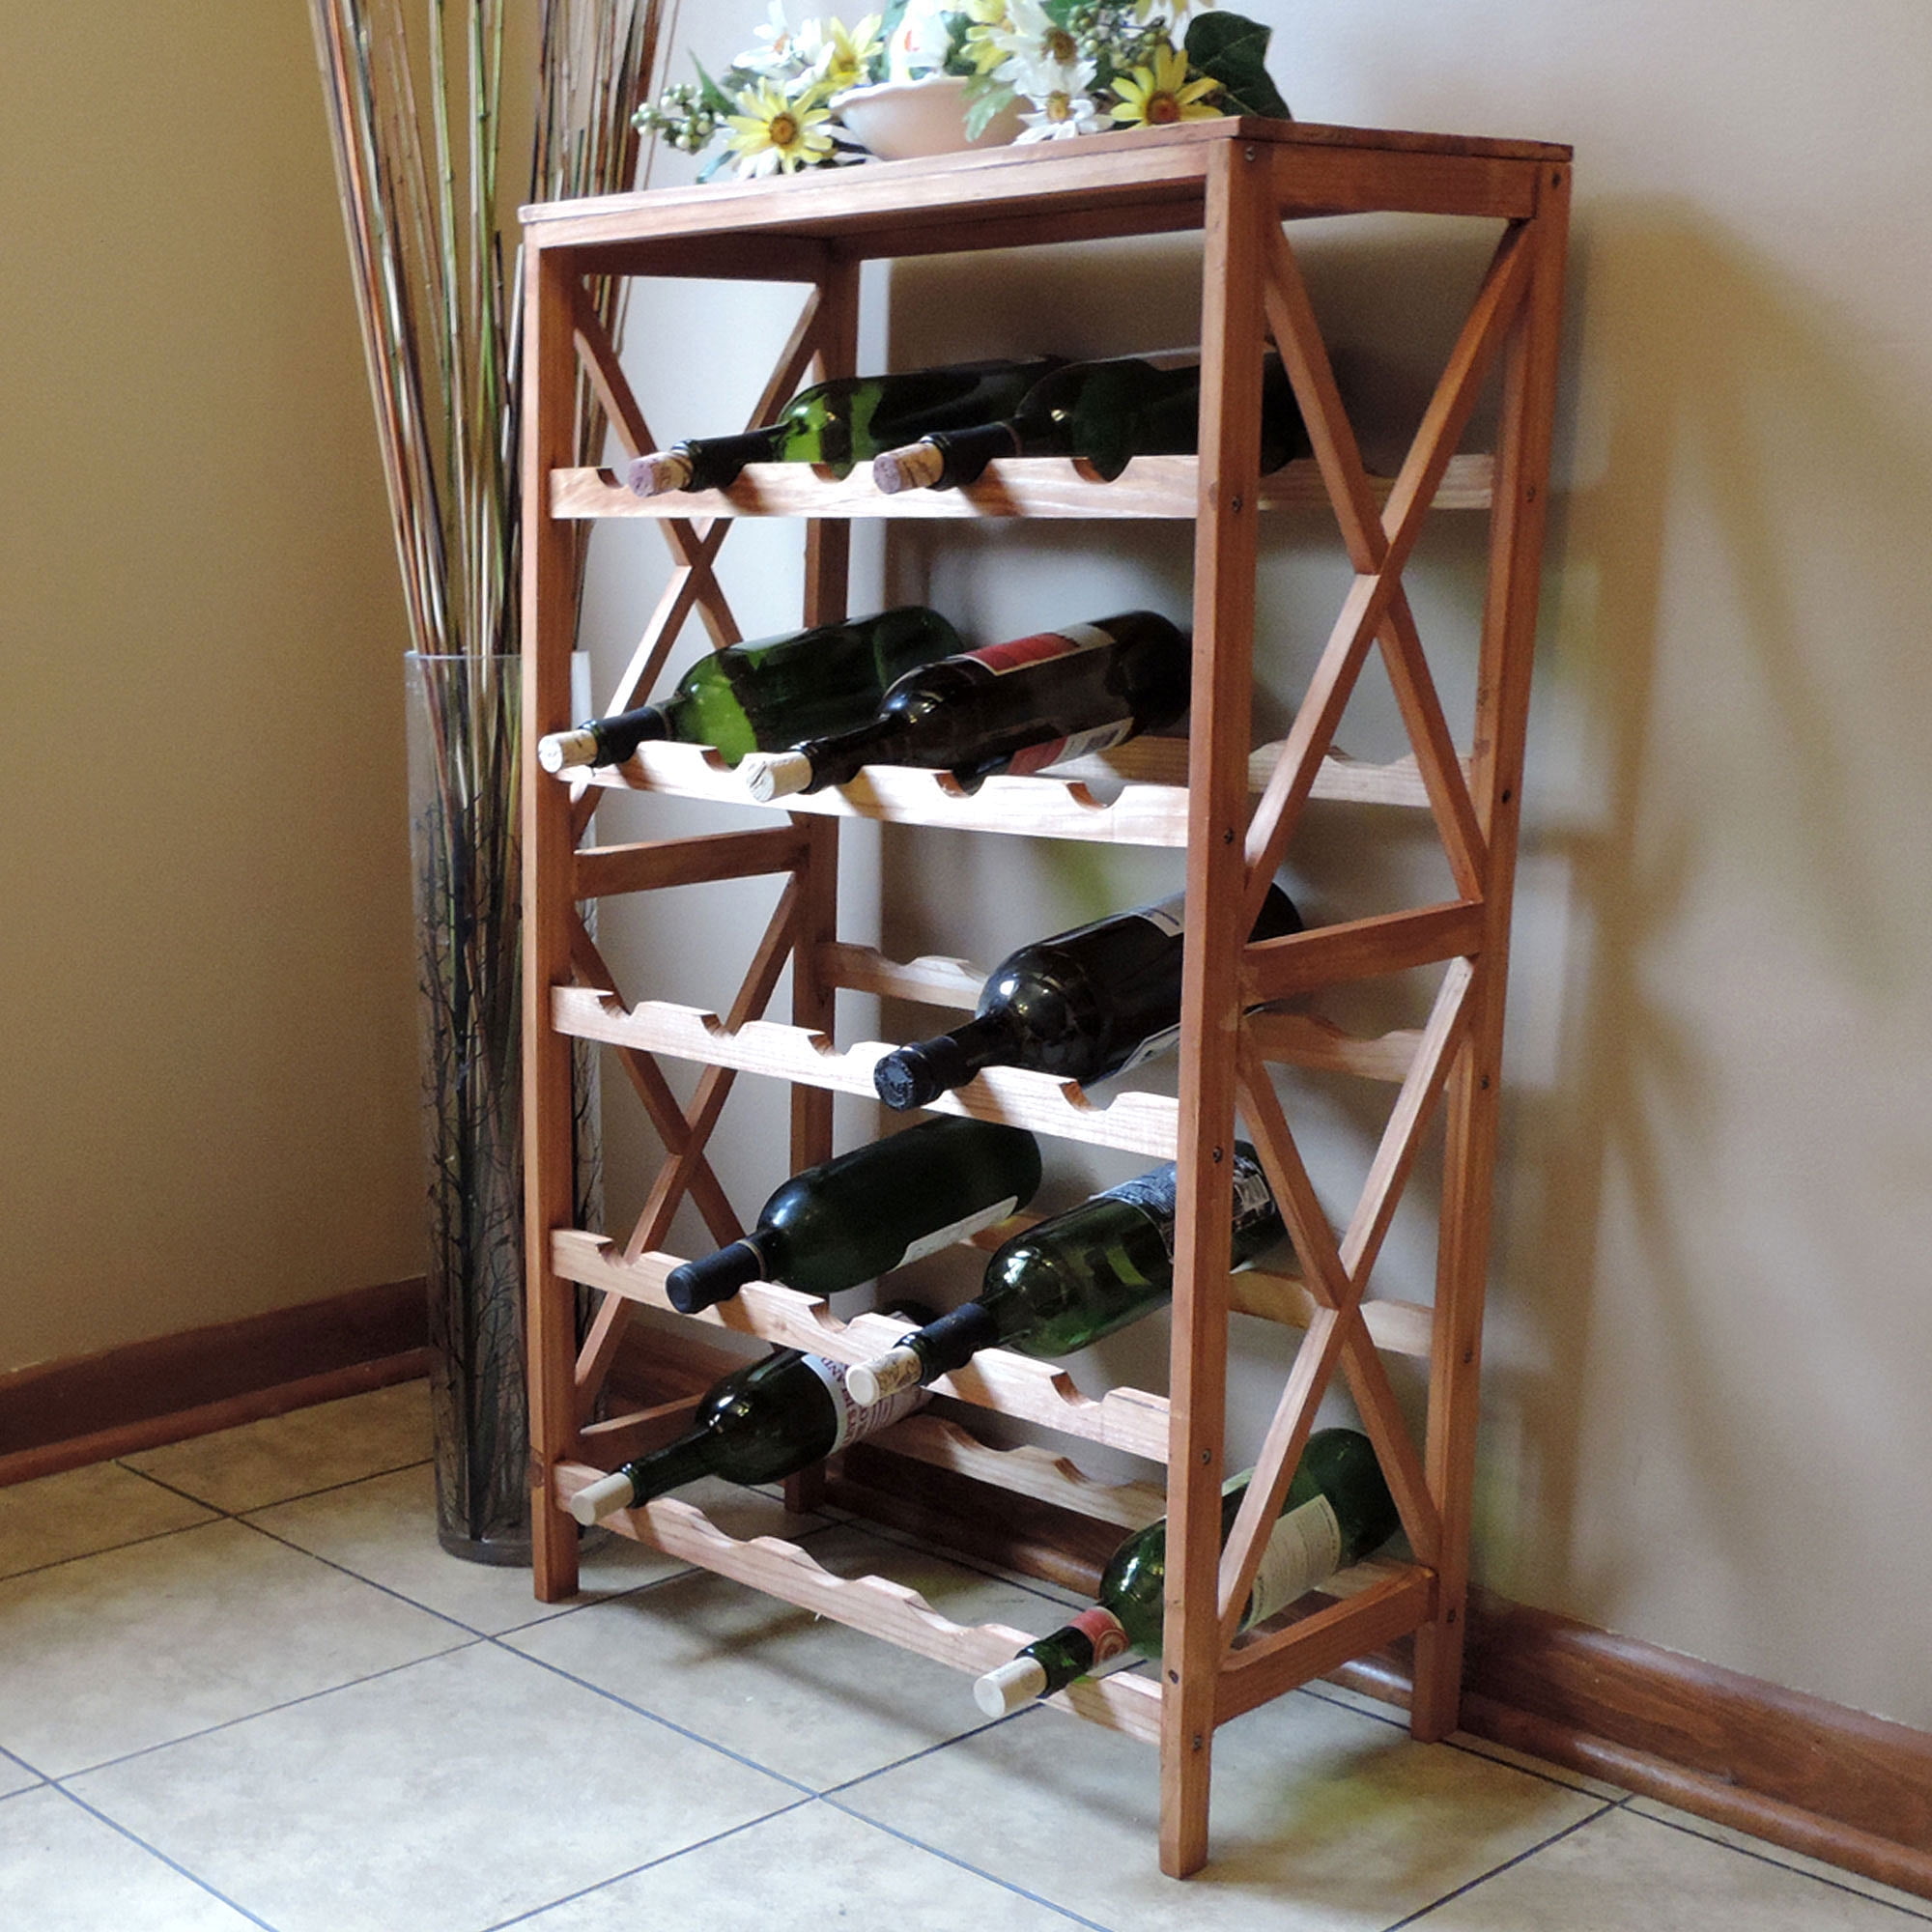 Wine Racks For Sale Near Me Online Hotsell, UP TO 53% OFF | www 